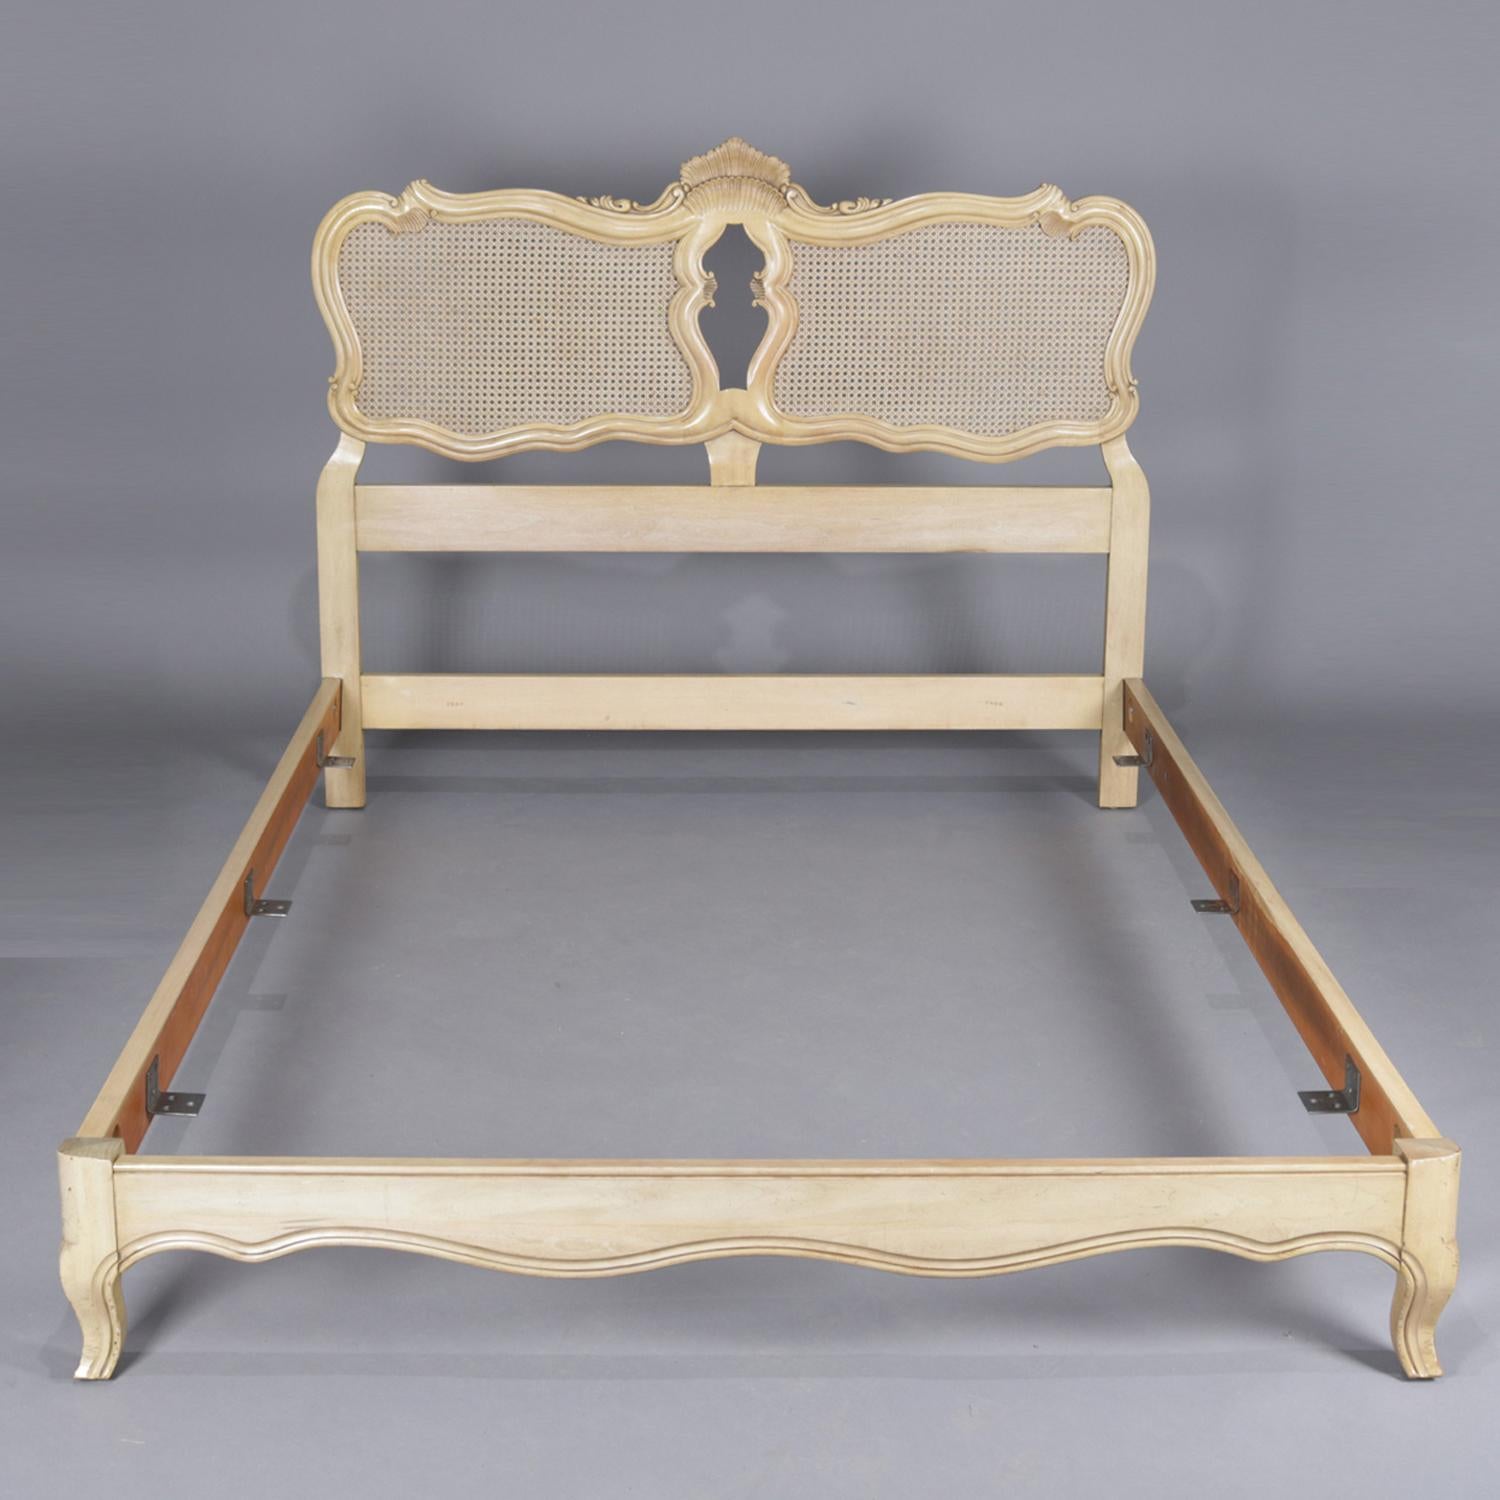 A vintage French Provincial style full/double bed frame by John Widdicomb features double caned panels framed by scrolled frames and joined by stylized carved central shell, raised on cabriole legs and with white washed painted finish, 20th